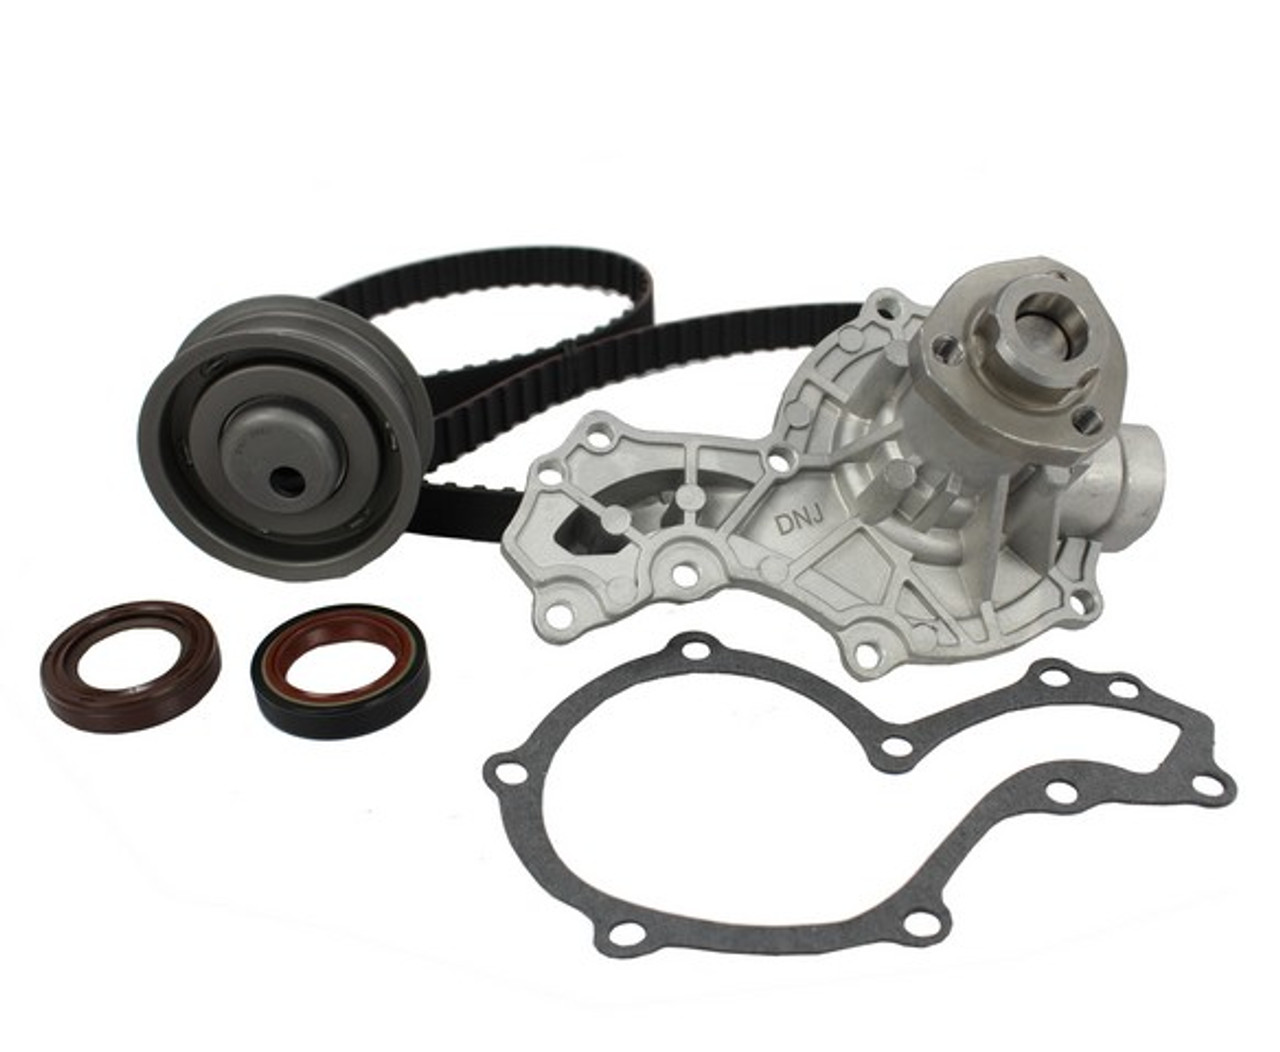 Timing Belt Kit with Water Pump 2.0L 1999 Volkswagen Cabrio - TBK803WP.5